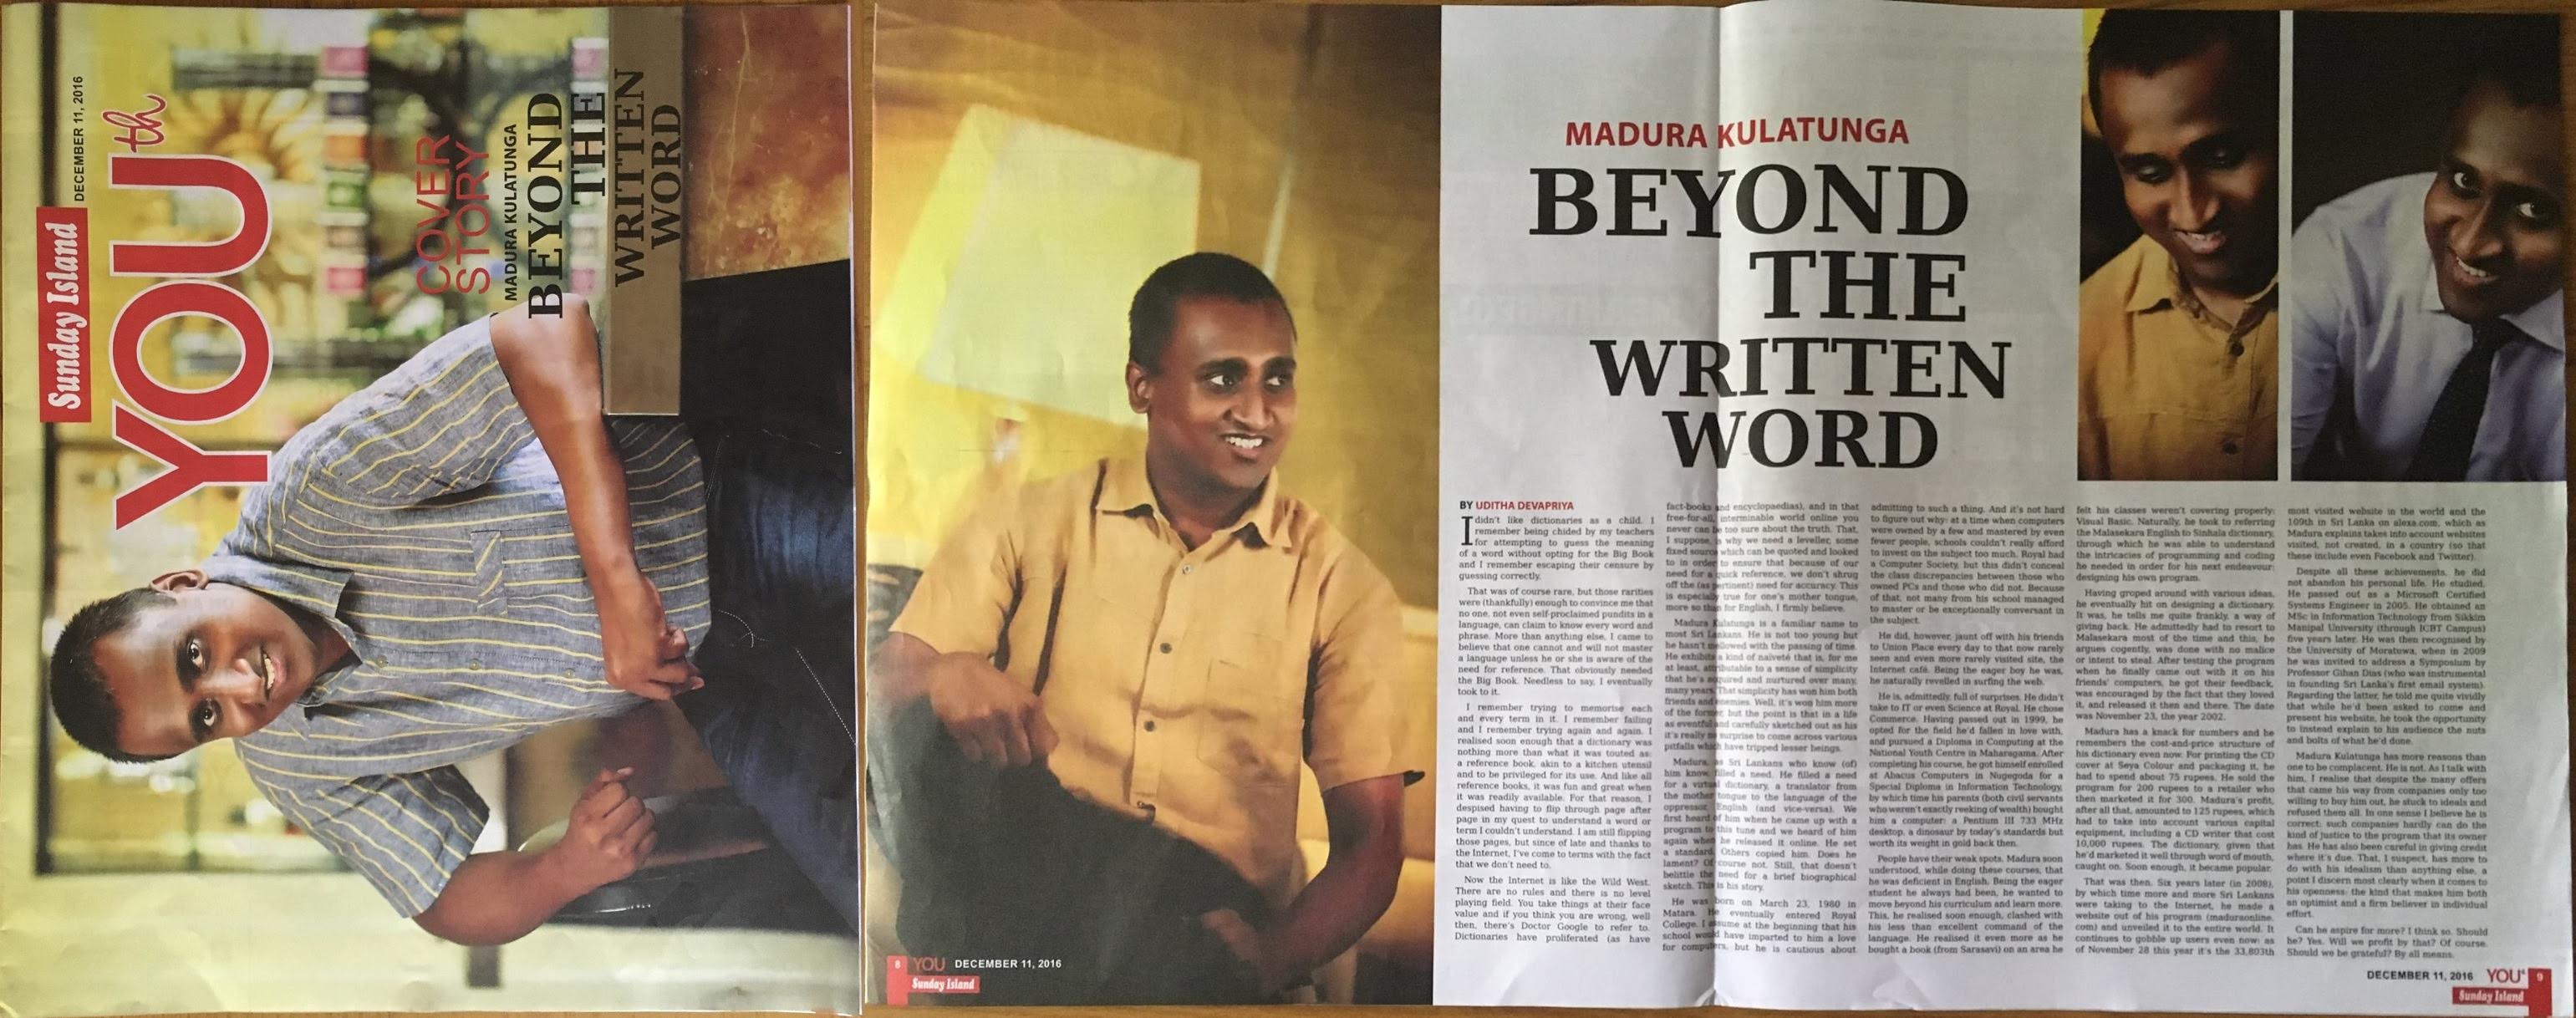 Madura Kulatunga Beyond the written word - The Island YOUth 11-December-2016 Cover Page & Page 8-9